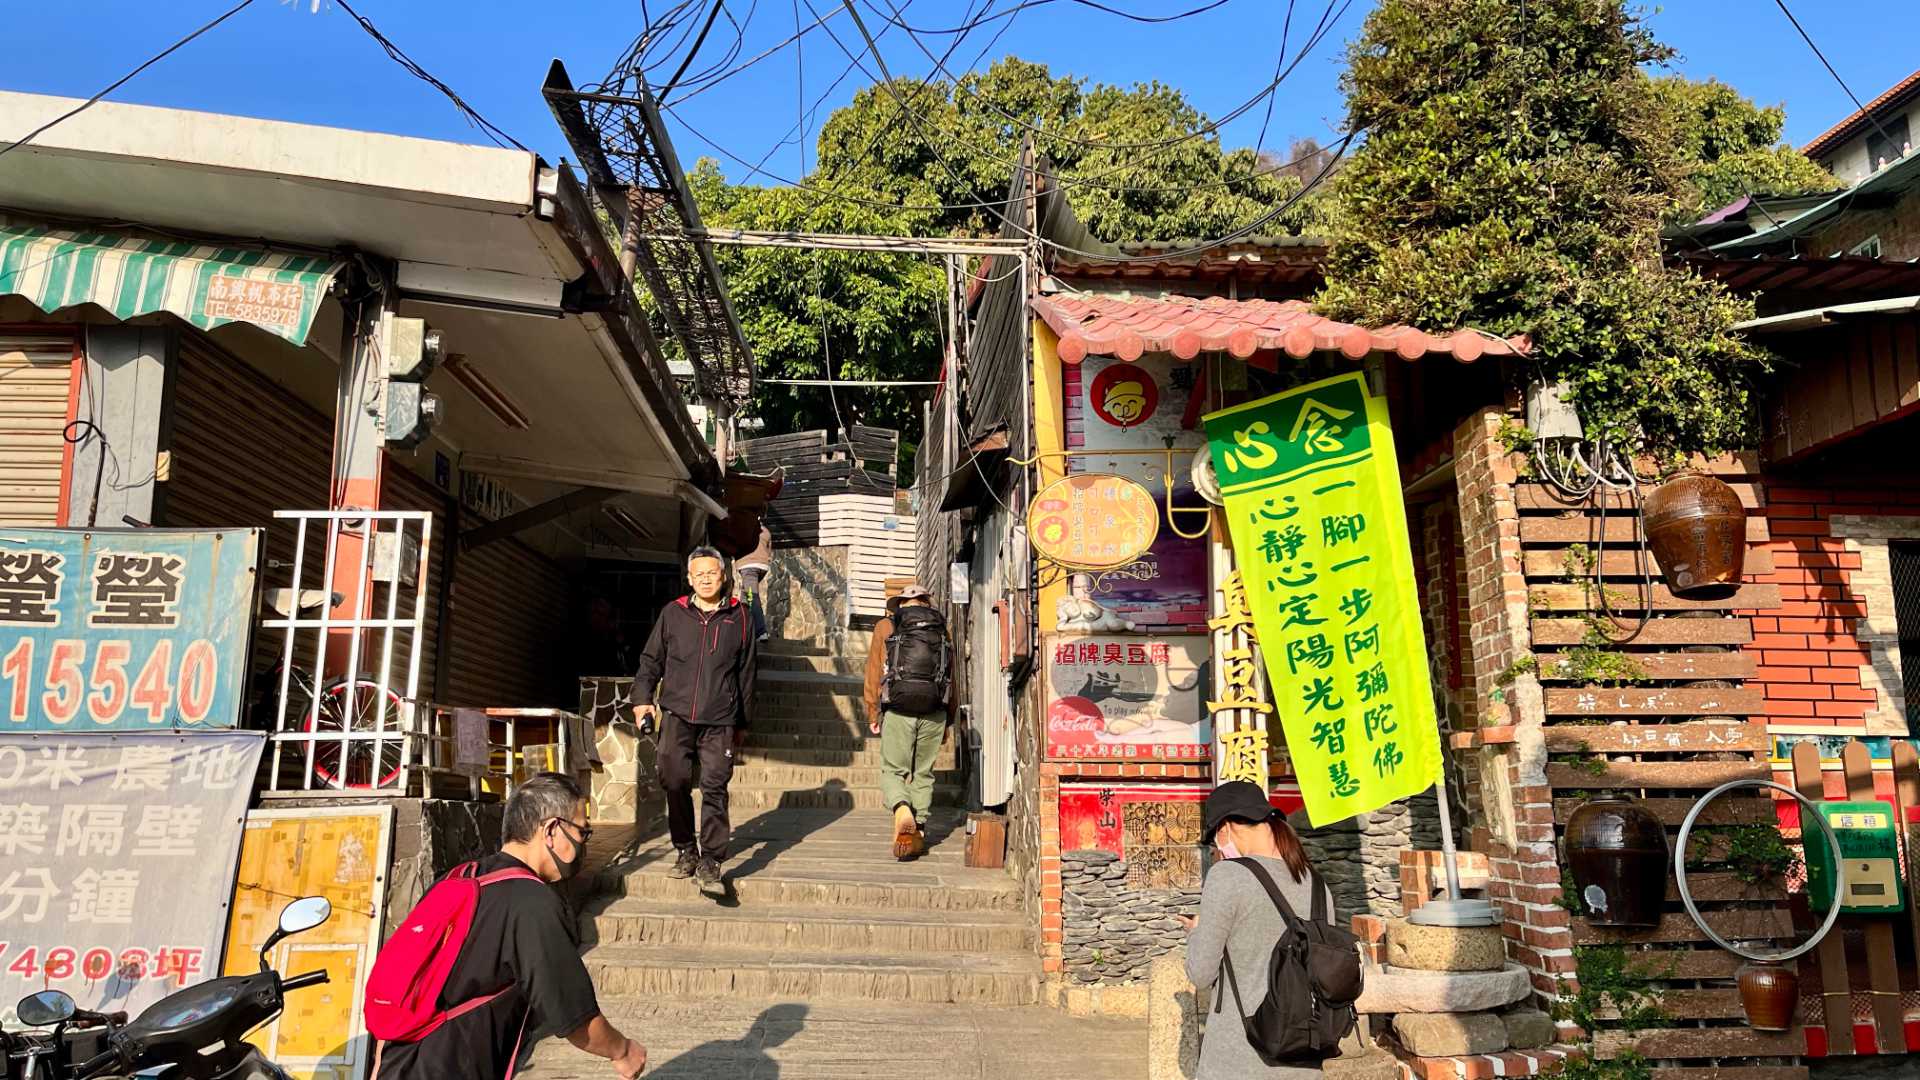 The first few steps up Monkey Mountain; a narrow staircase between small shops.